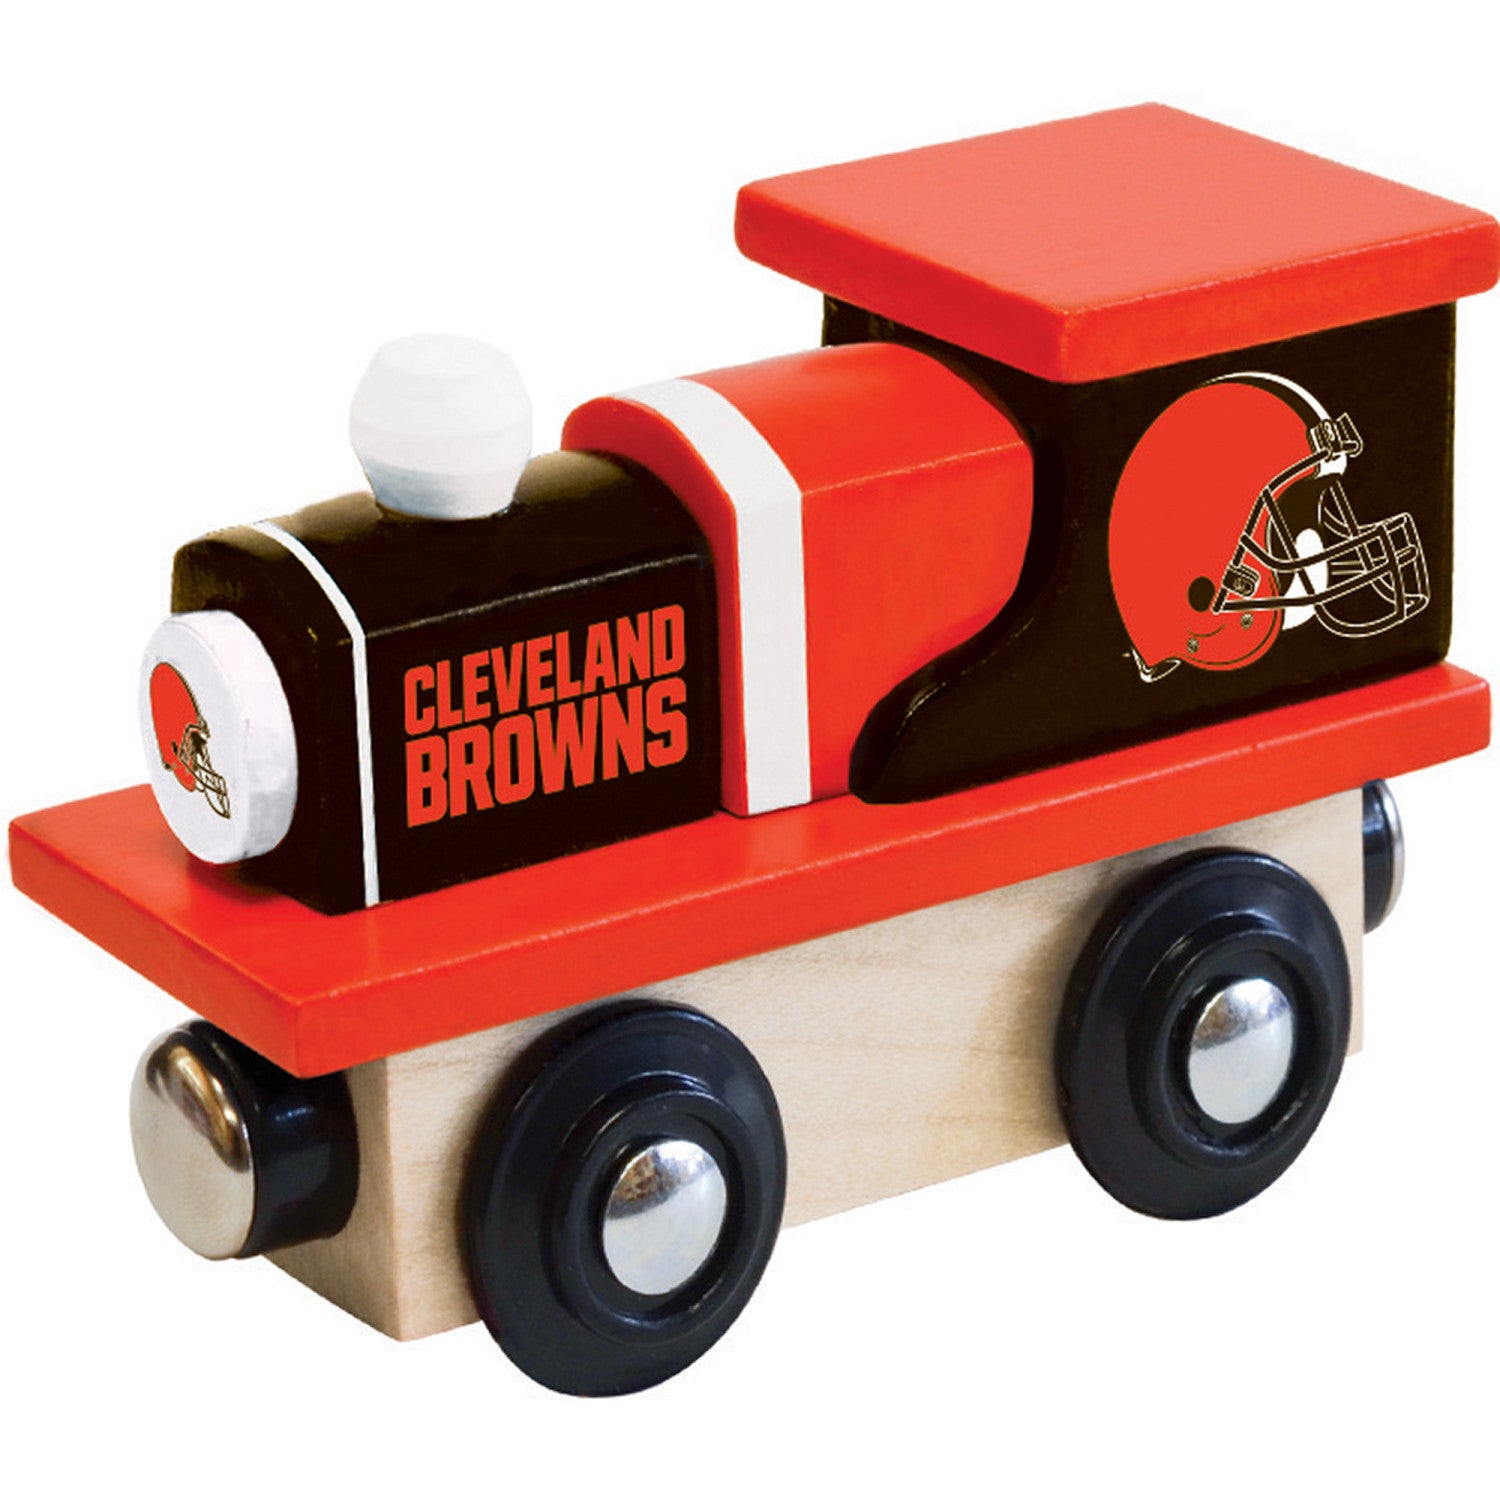 Cleveland Browns Toy Train Engine